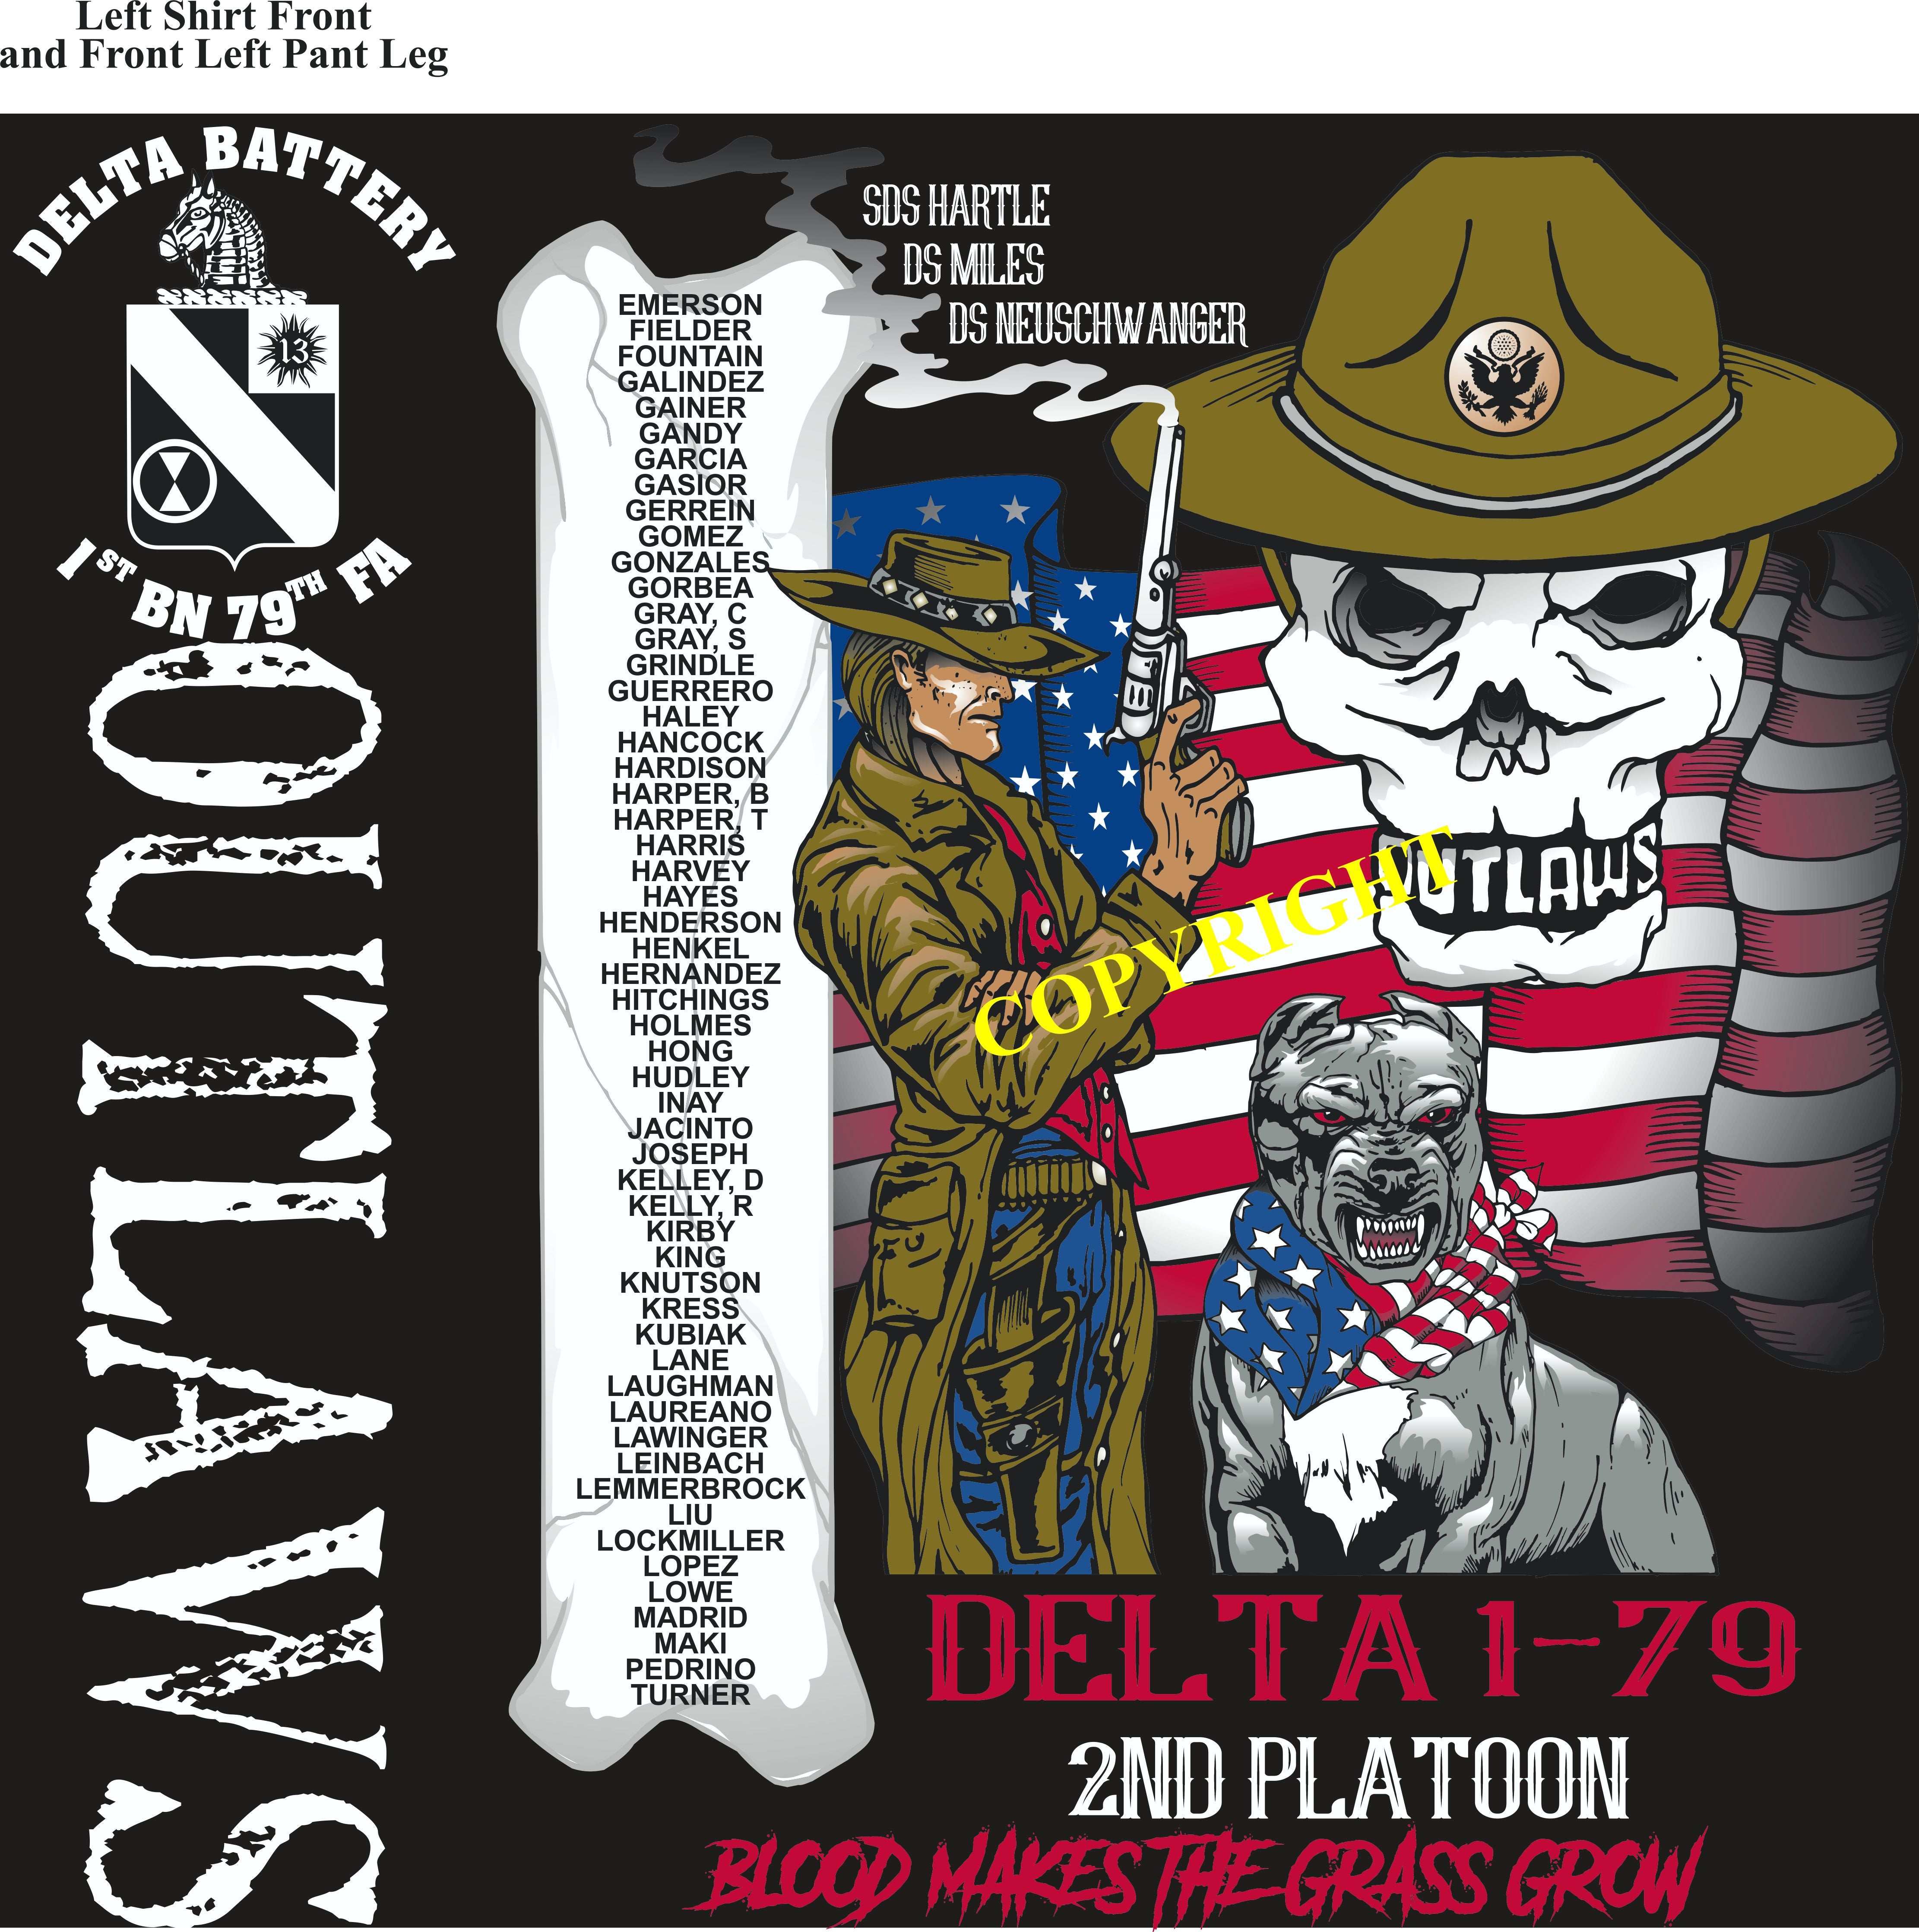 Platoon Shirts (2nd generation print) DELTA 1st 79th OUTLAWS OCT 2018